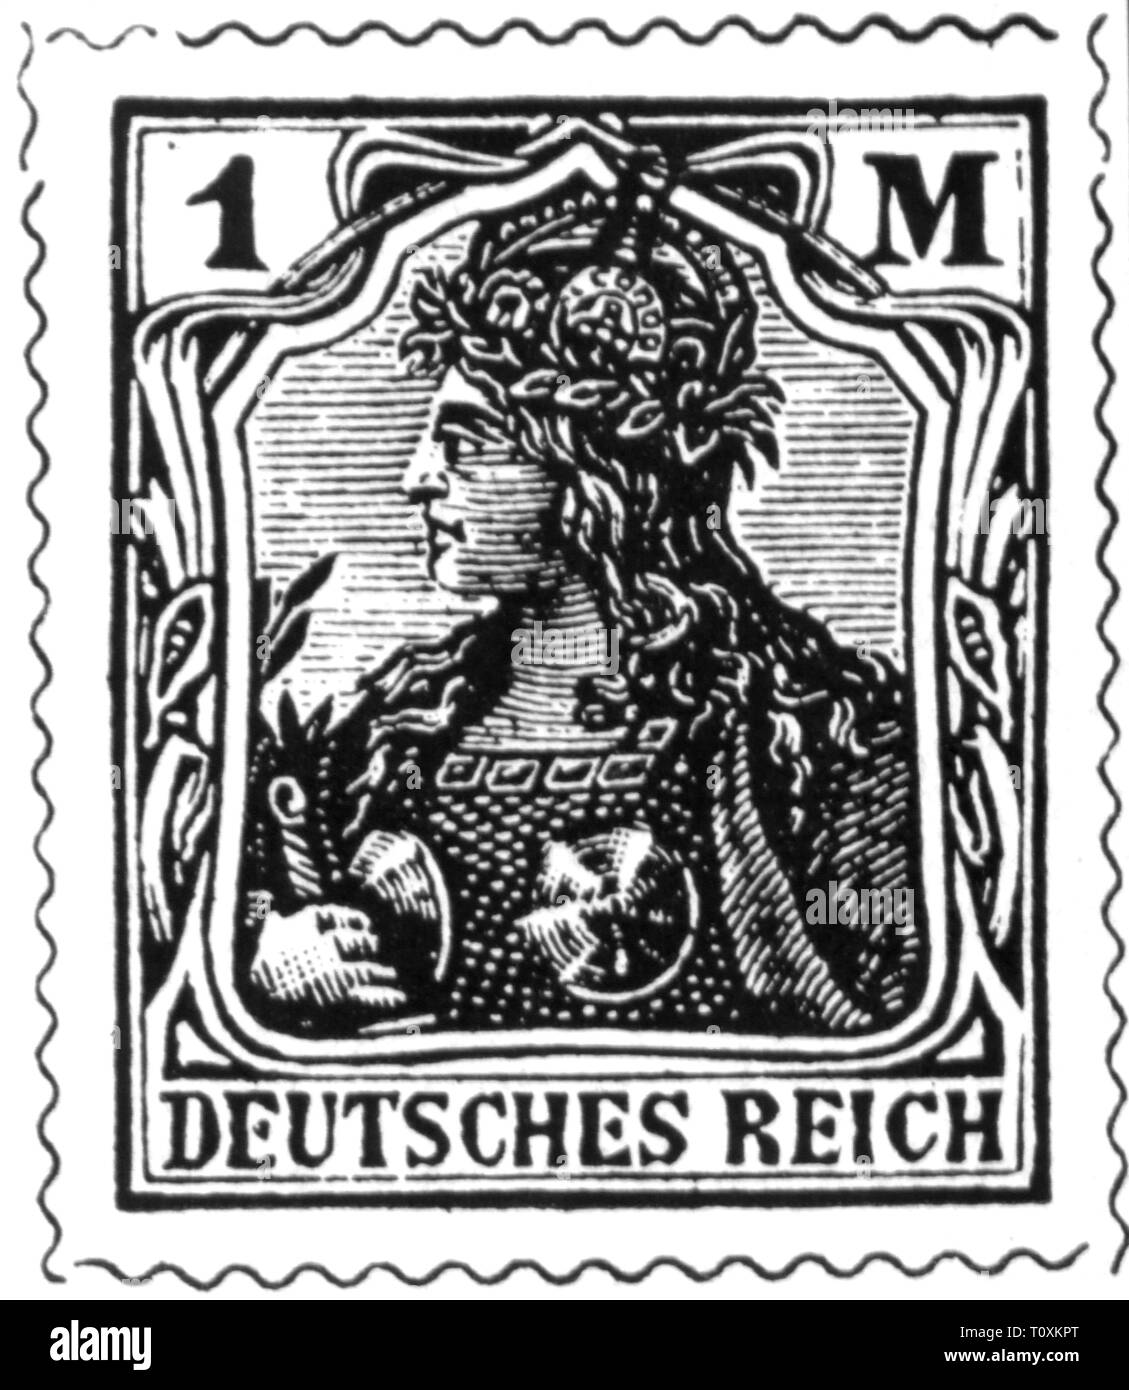 mail, postage stamps, Germany, German Reichspost (Reich Mail), 1 mark postage stamp, Germania, 1920, Additional-Rights-Clearance-Info-Not-Available Stock Photo